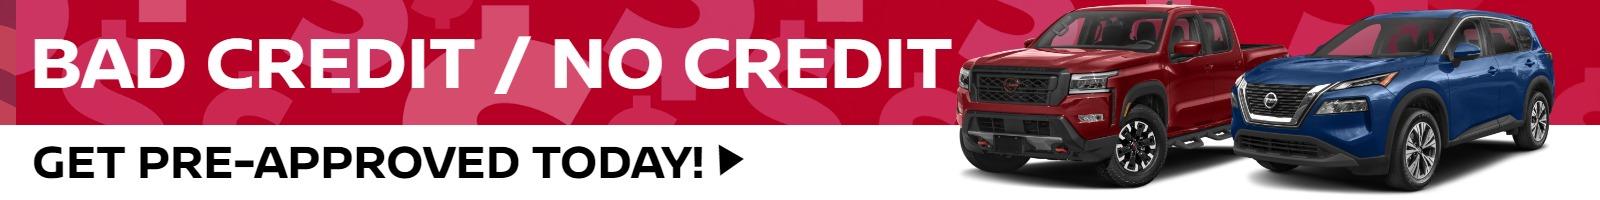 BAD CREDIT / NO CREDIT Get Pre-Approved Today!